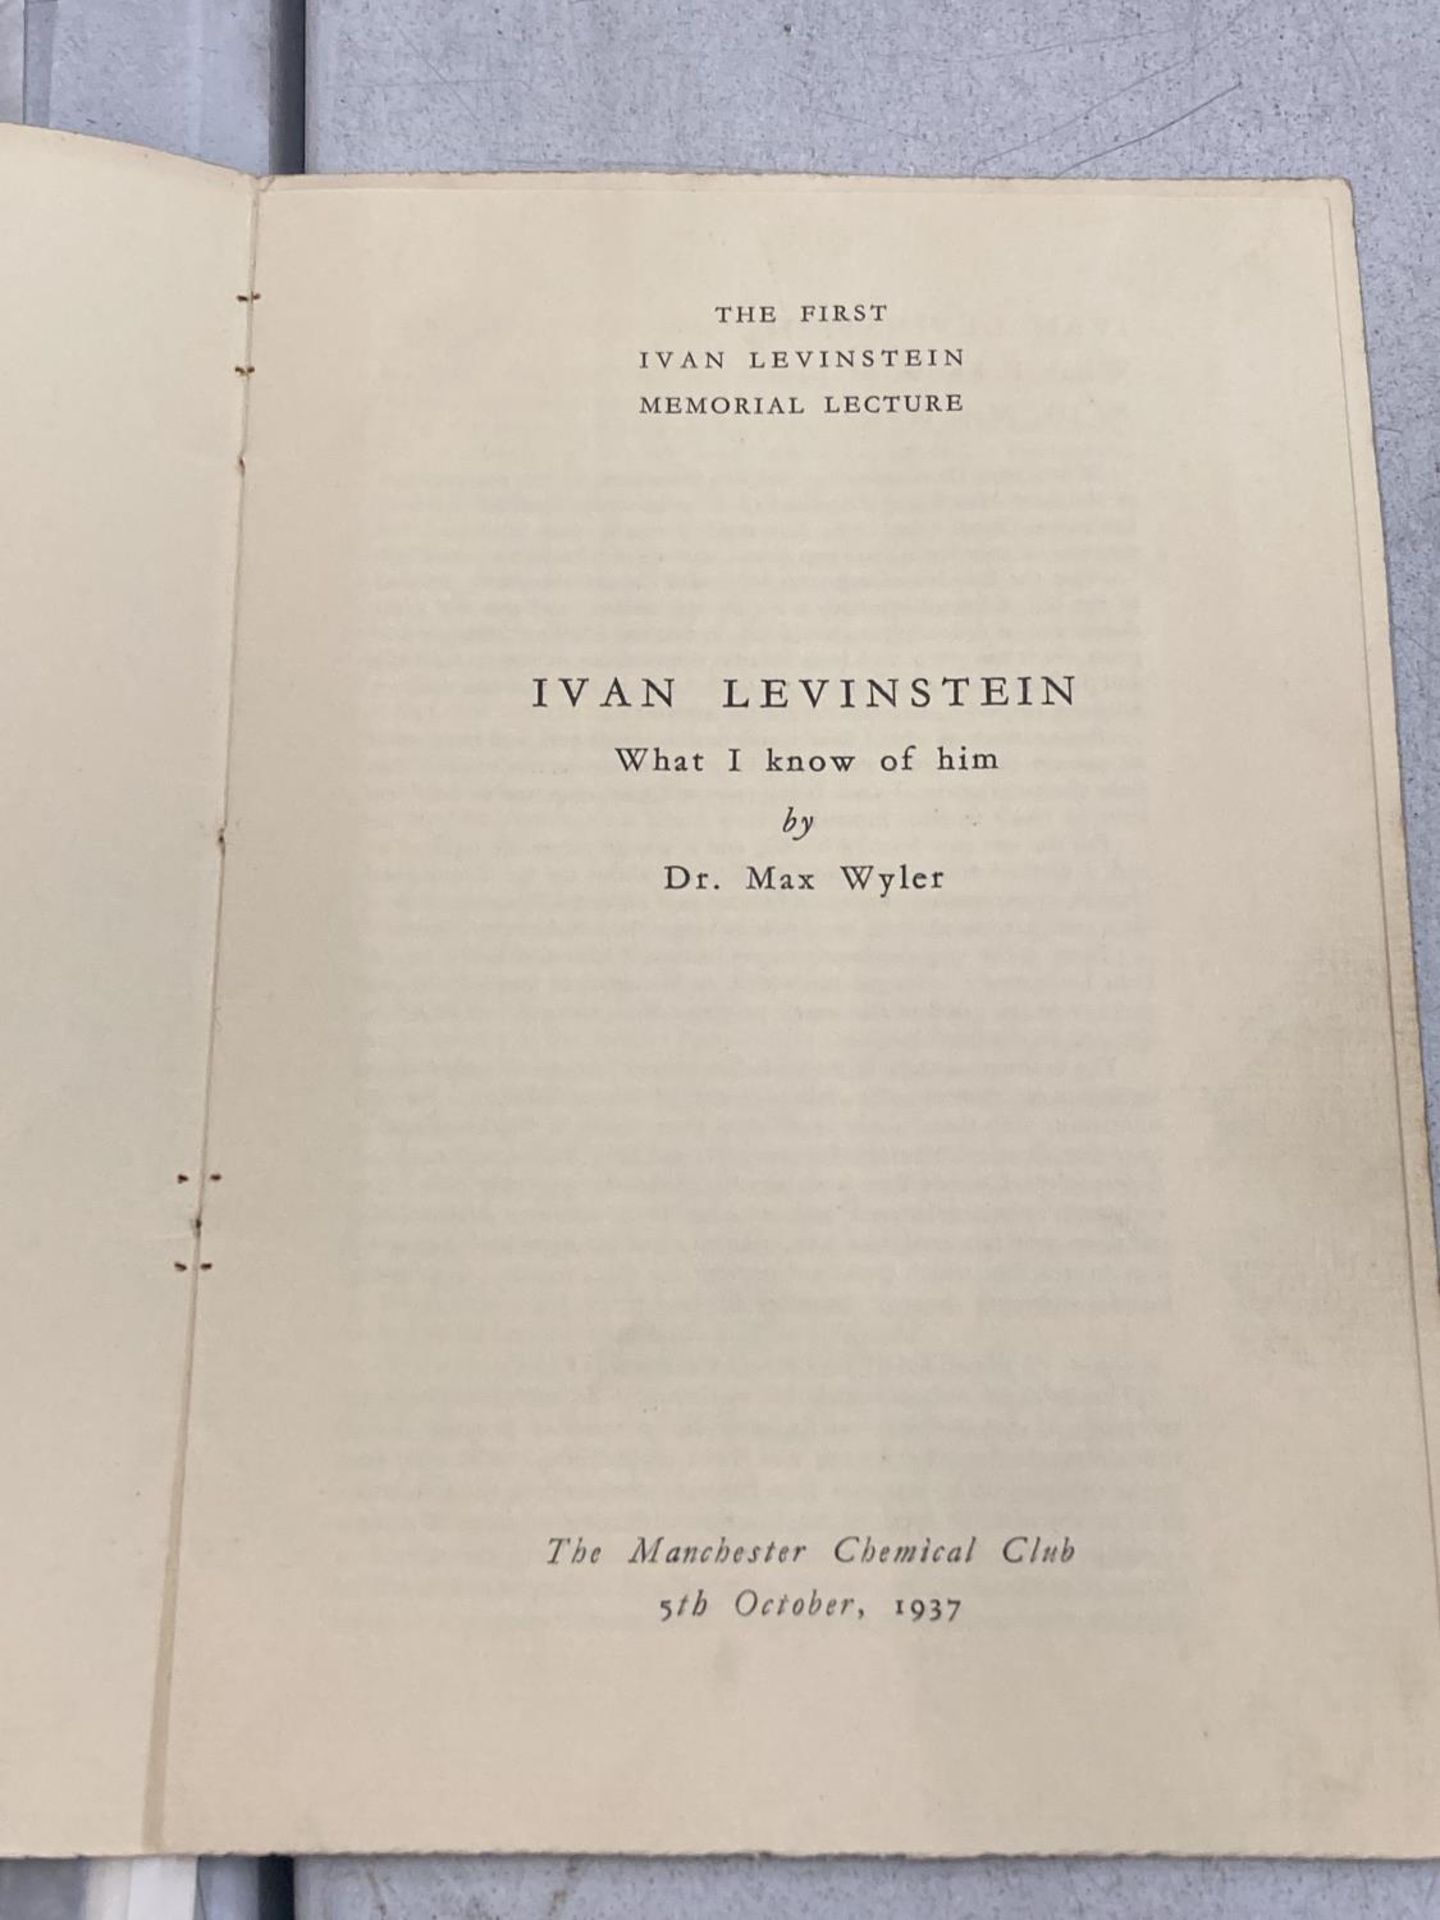 A COPY OF THE FIRST IVAN LEVINSTEIN MEMORIAL LECTURE AT THE MANCHESTER CLUB, 5TH OCTOBER, 1937 - Image 2 of 4